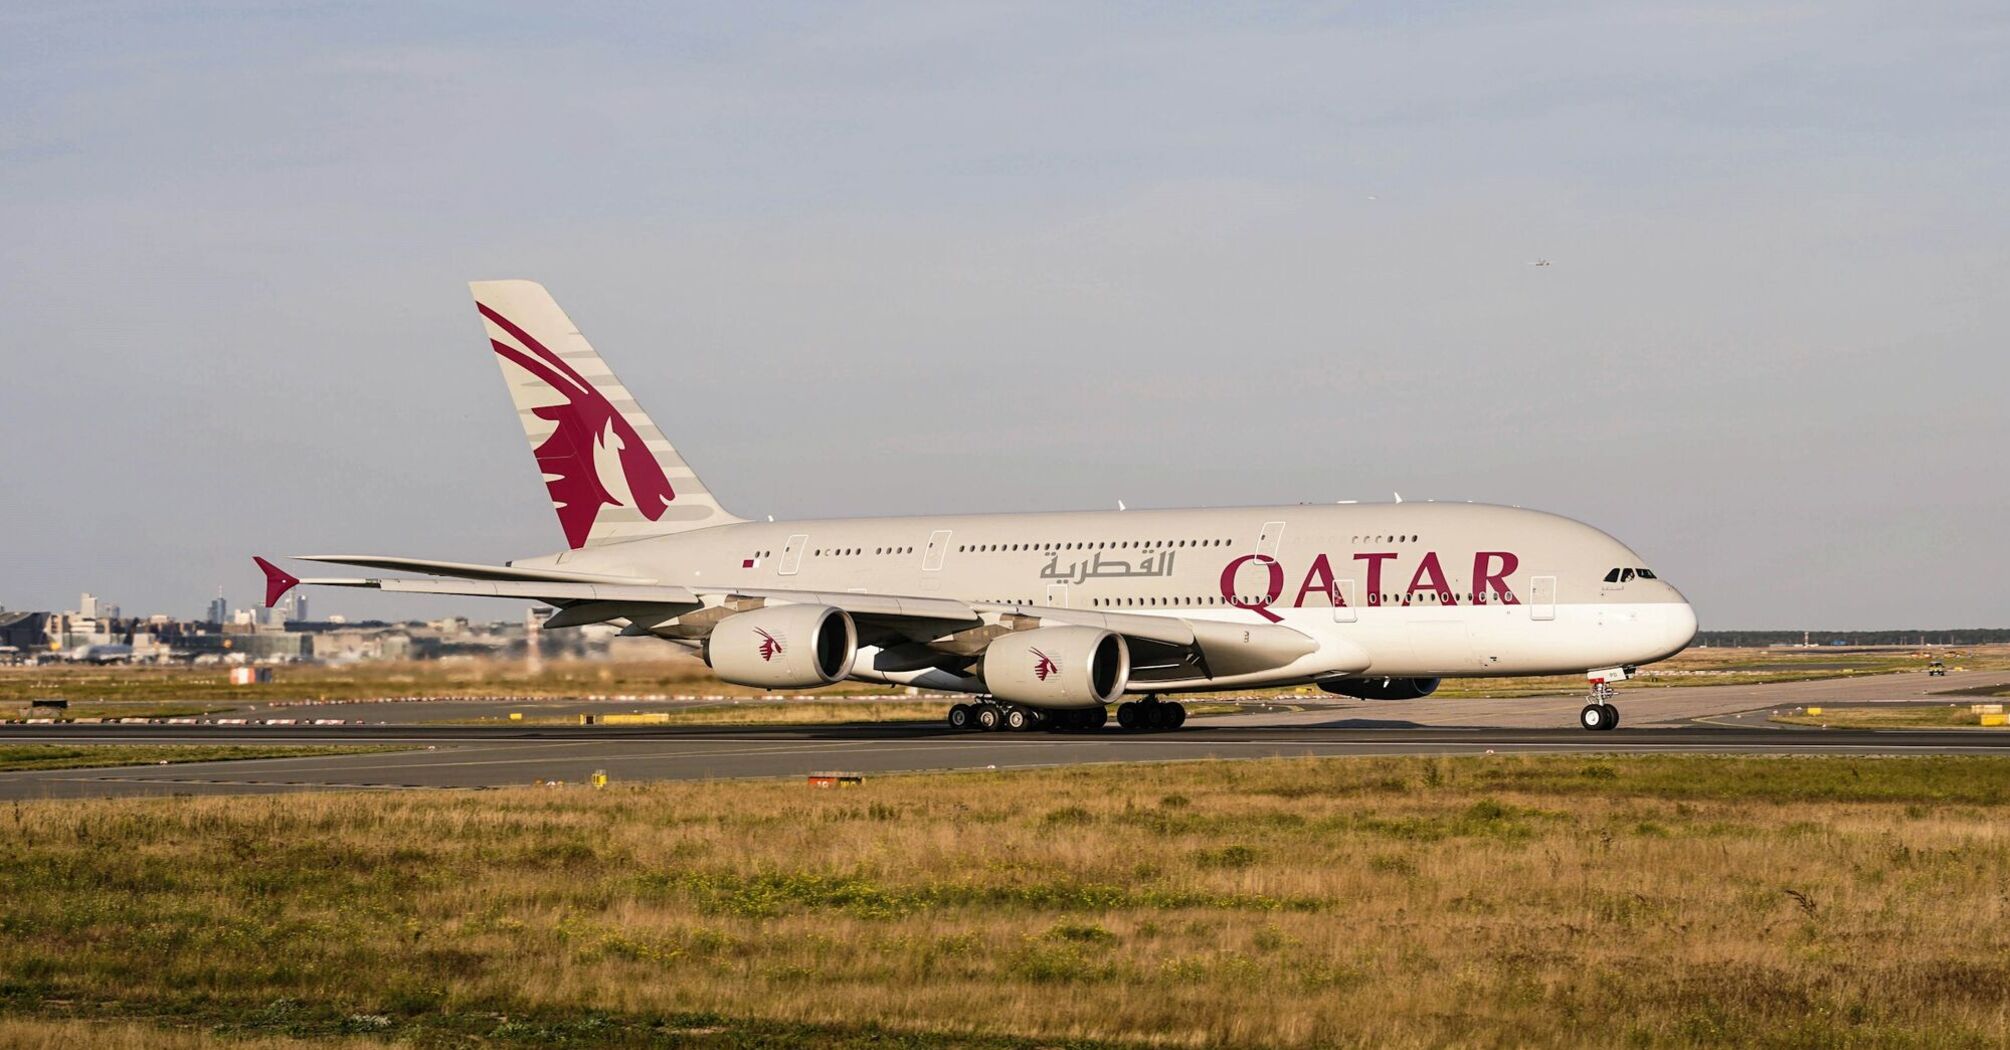 A Qatar Airways Airbus on the runway, ready for takeoff